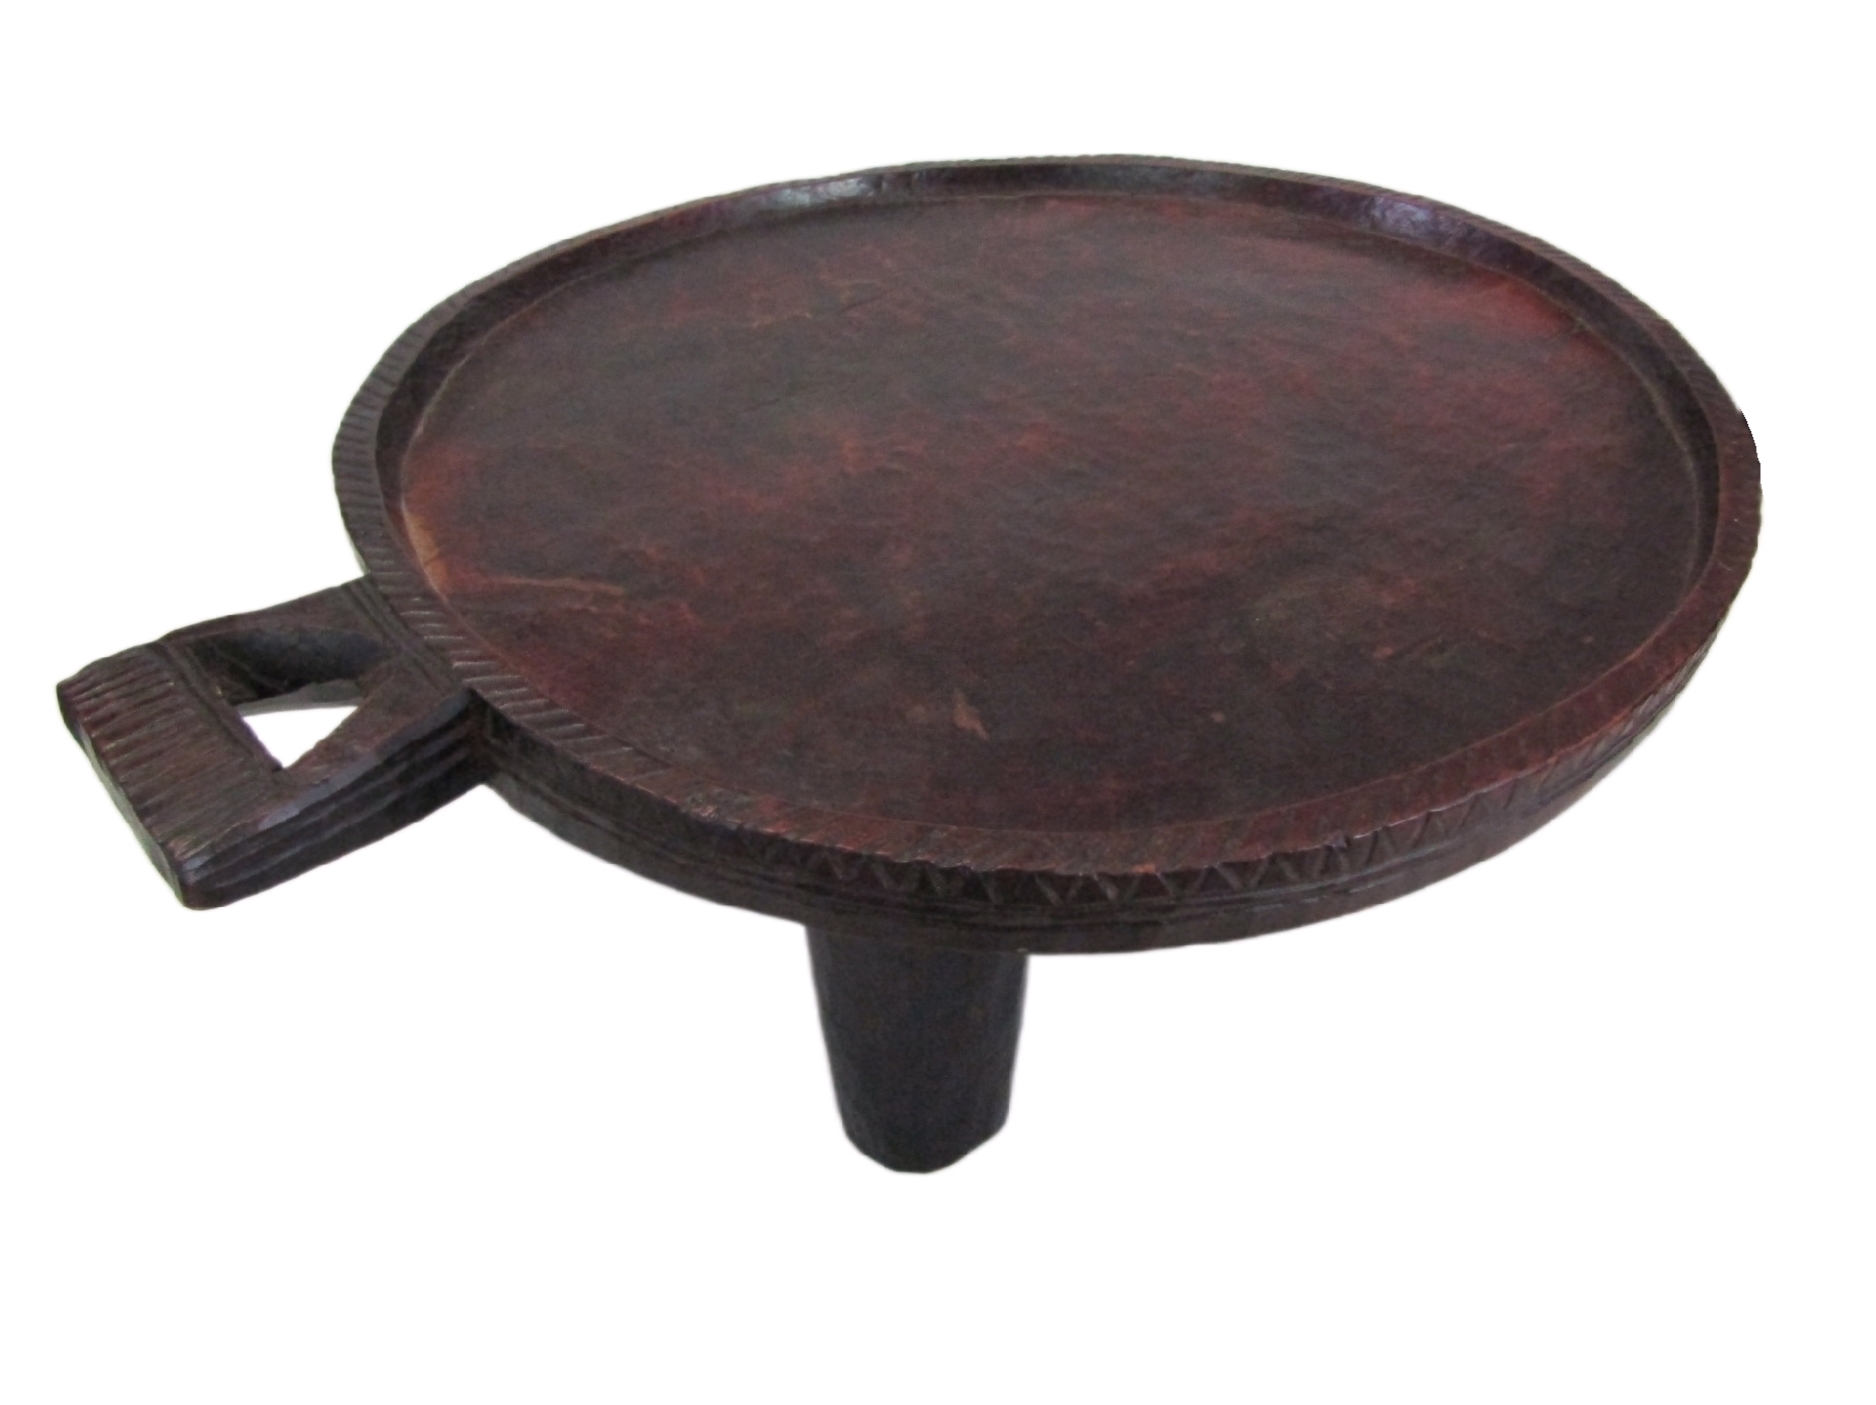 Rare Find! Vintage Ethiopian Gurage Wooden Footed Tray